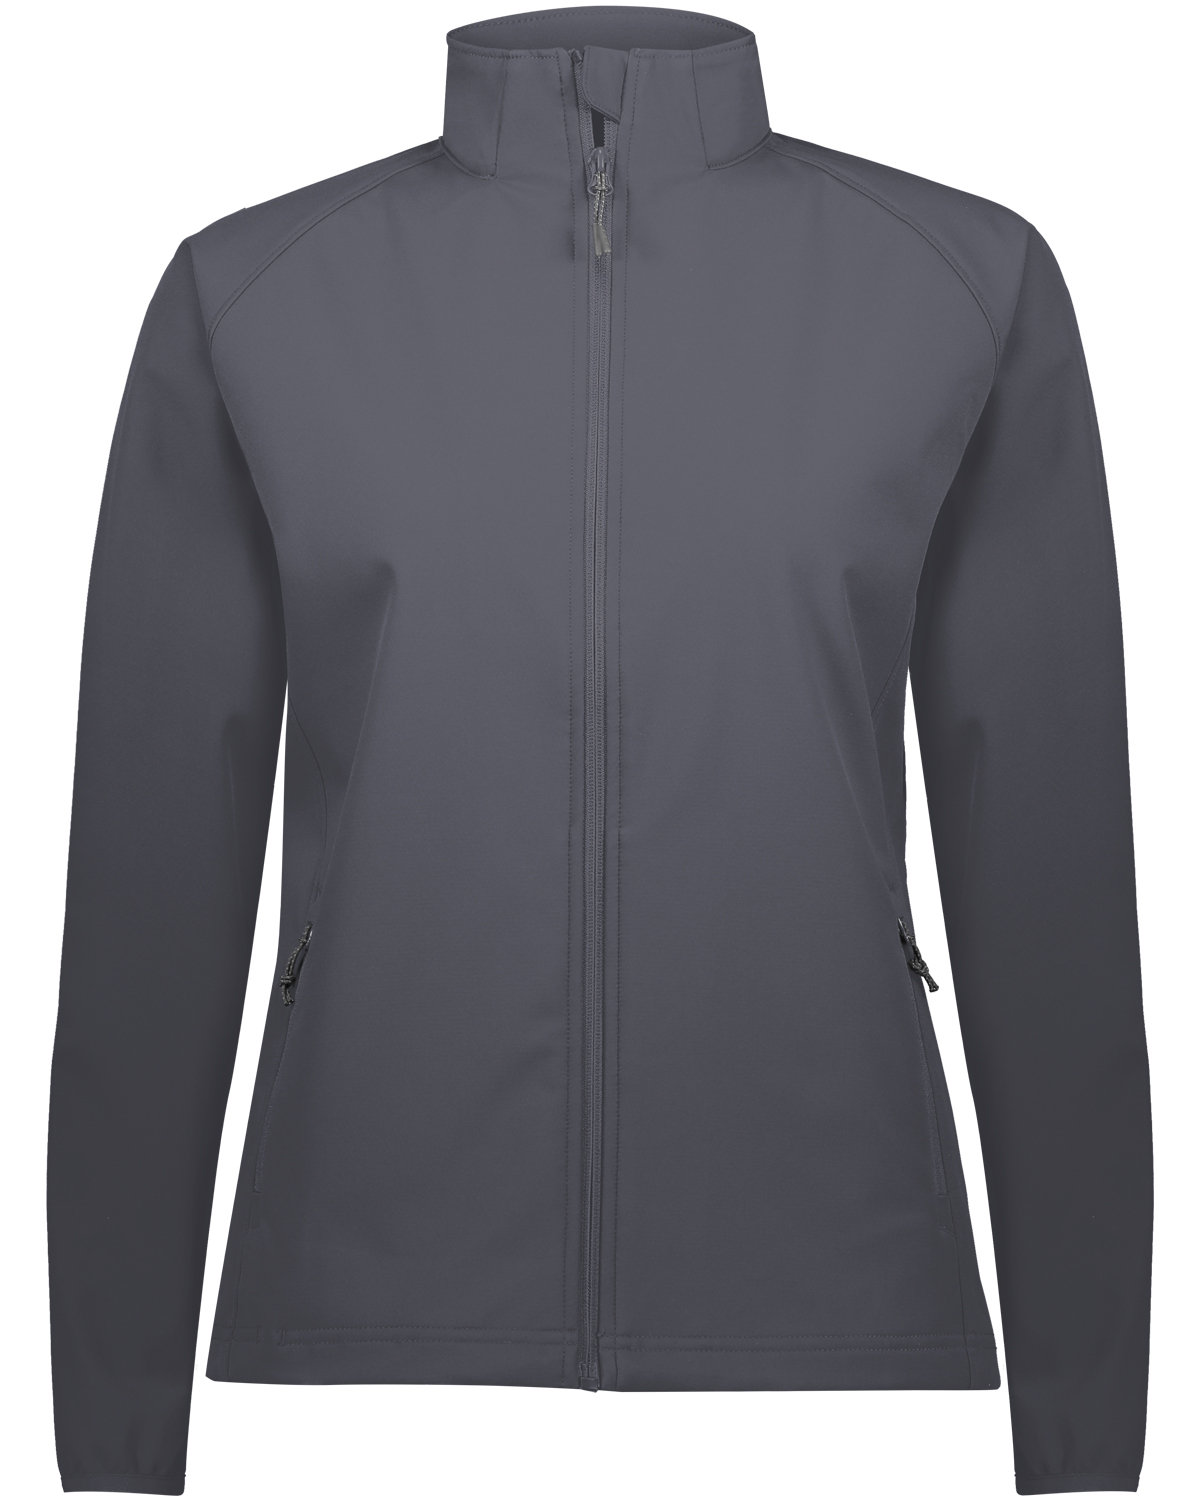 Buy Ladies Featherlite Soft Shell Jacket - Holloway Online at Best ...